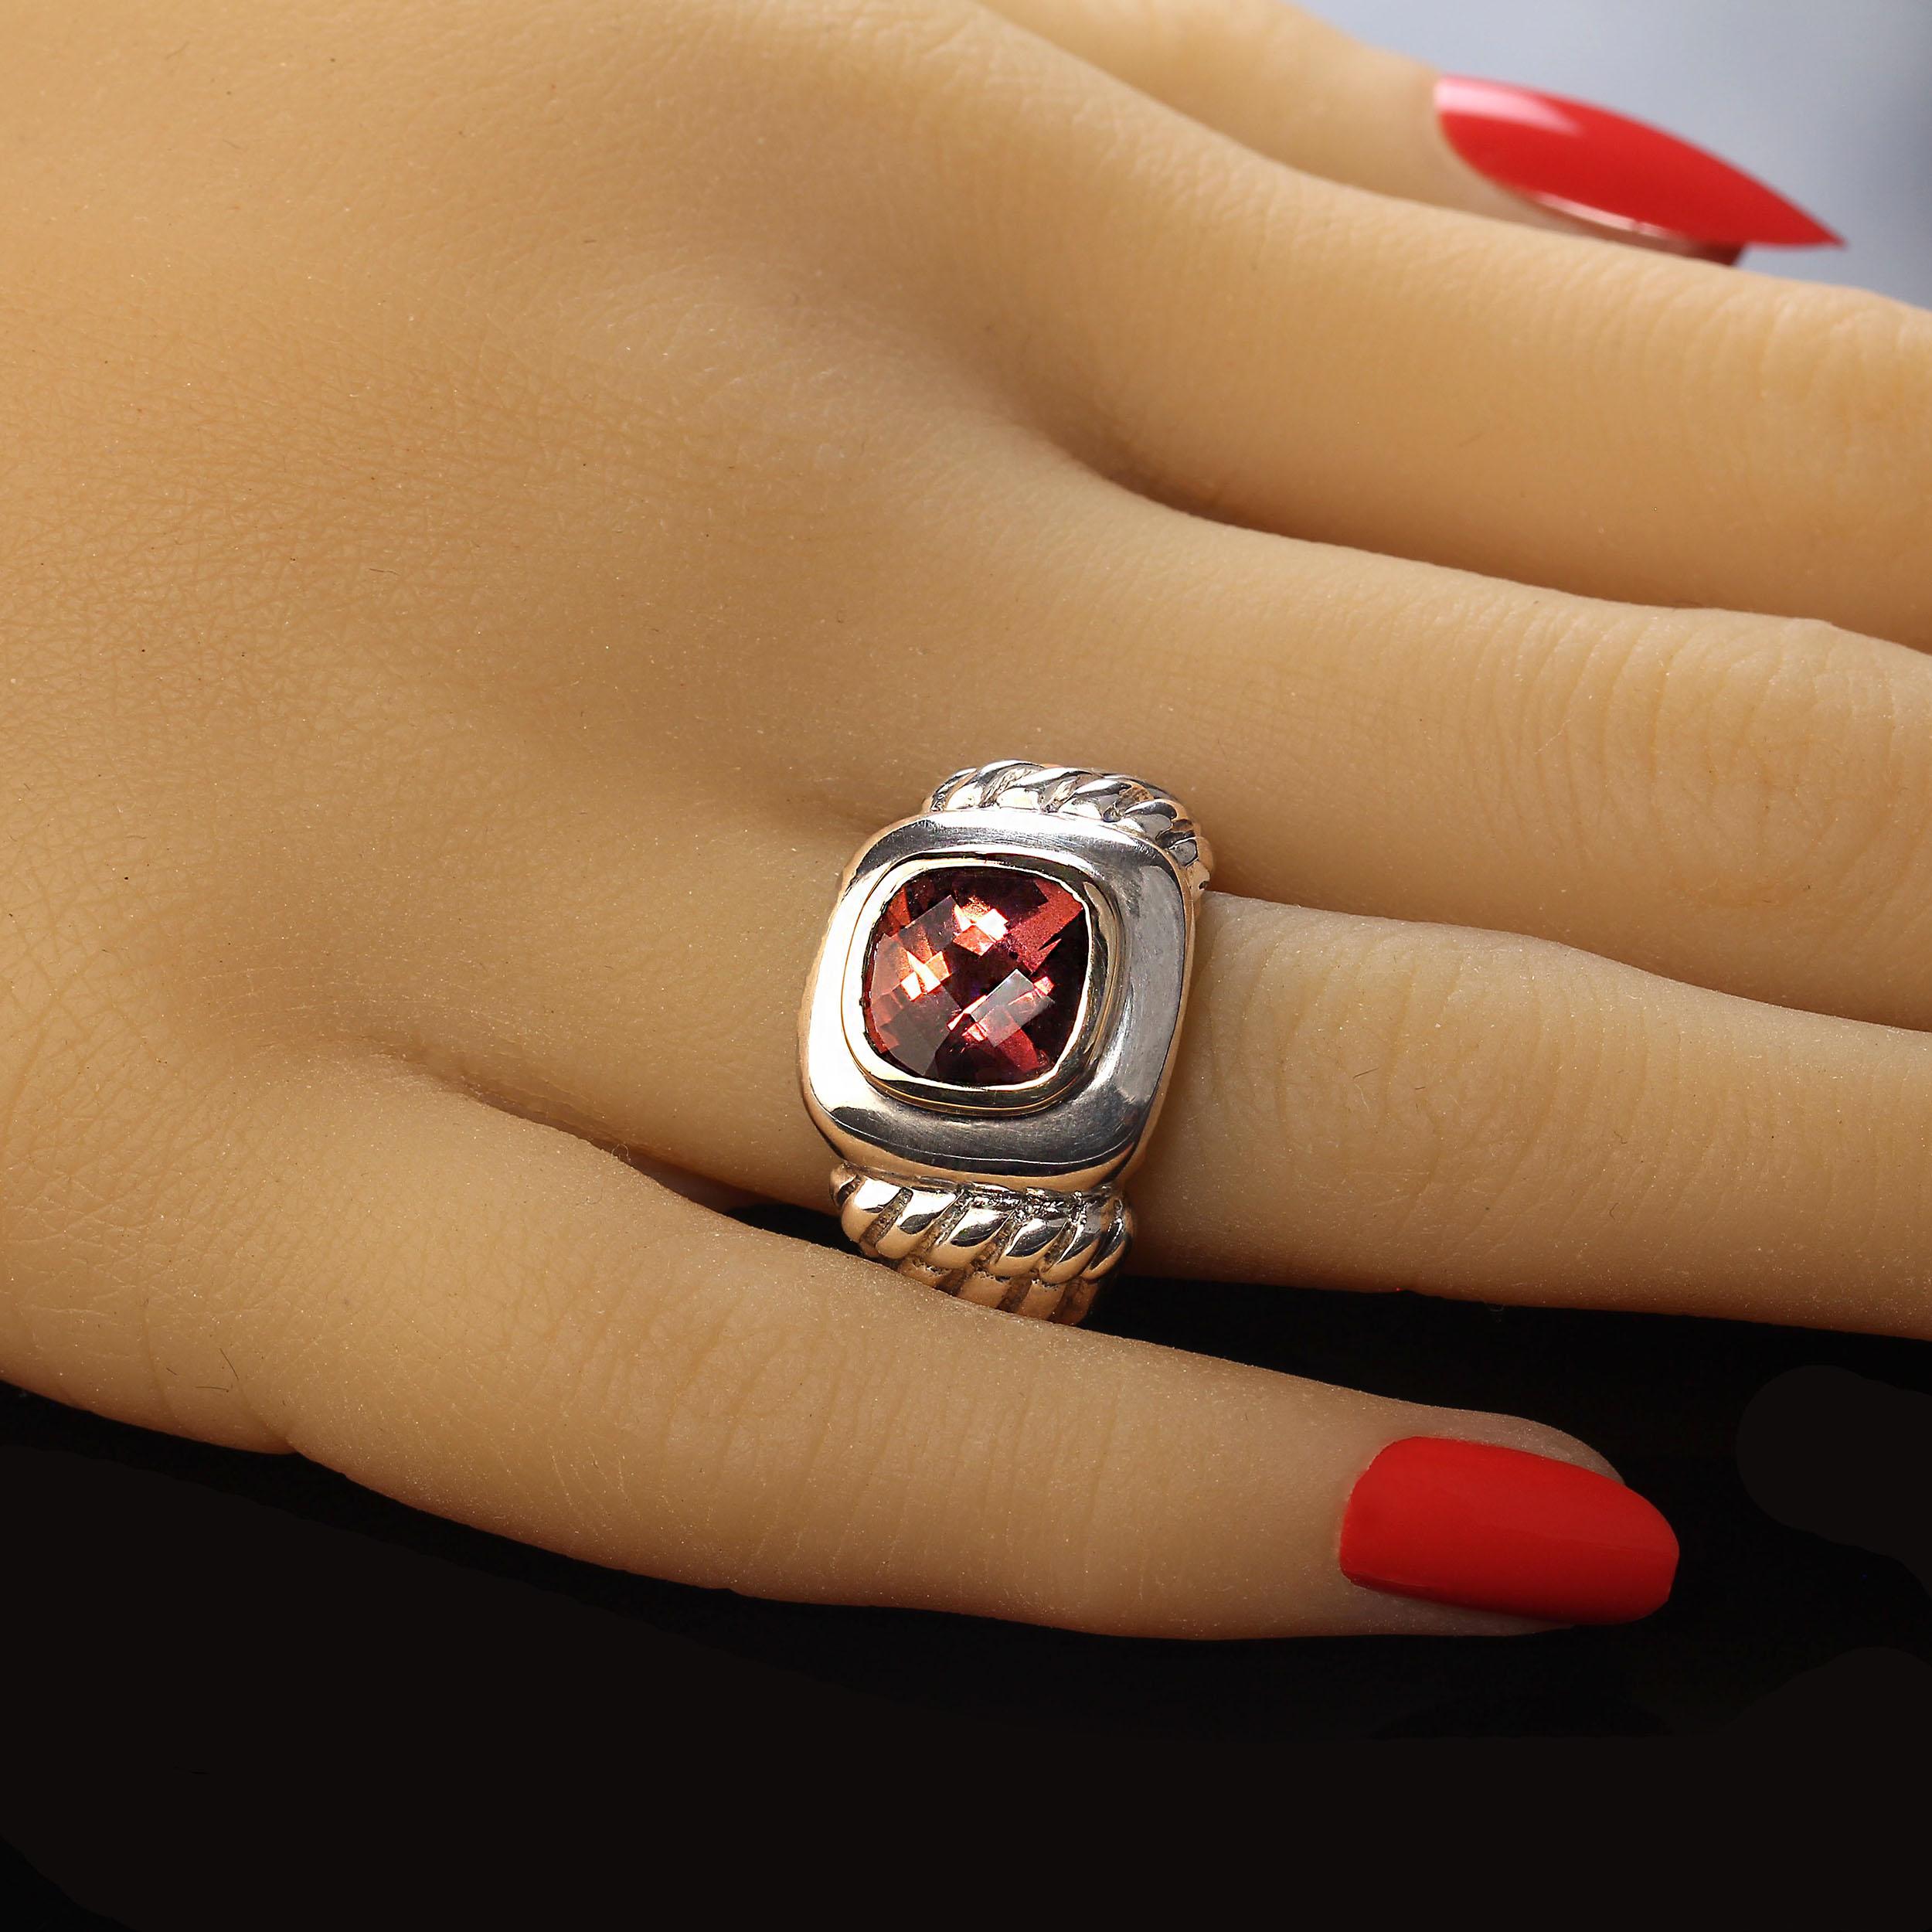 Striking cocktail ring with substantial sterling silver. The cushion cut pinkish red topaz features a checkerboard table and is enhanced with a warm glowing 14K yellow gold bezel. No changes by seller. Size 6. Your local jeweler can size this